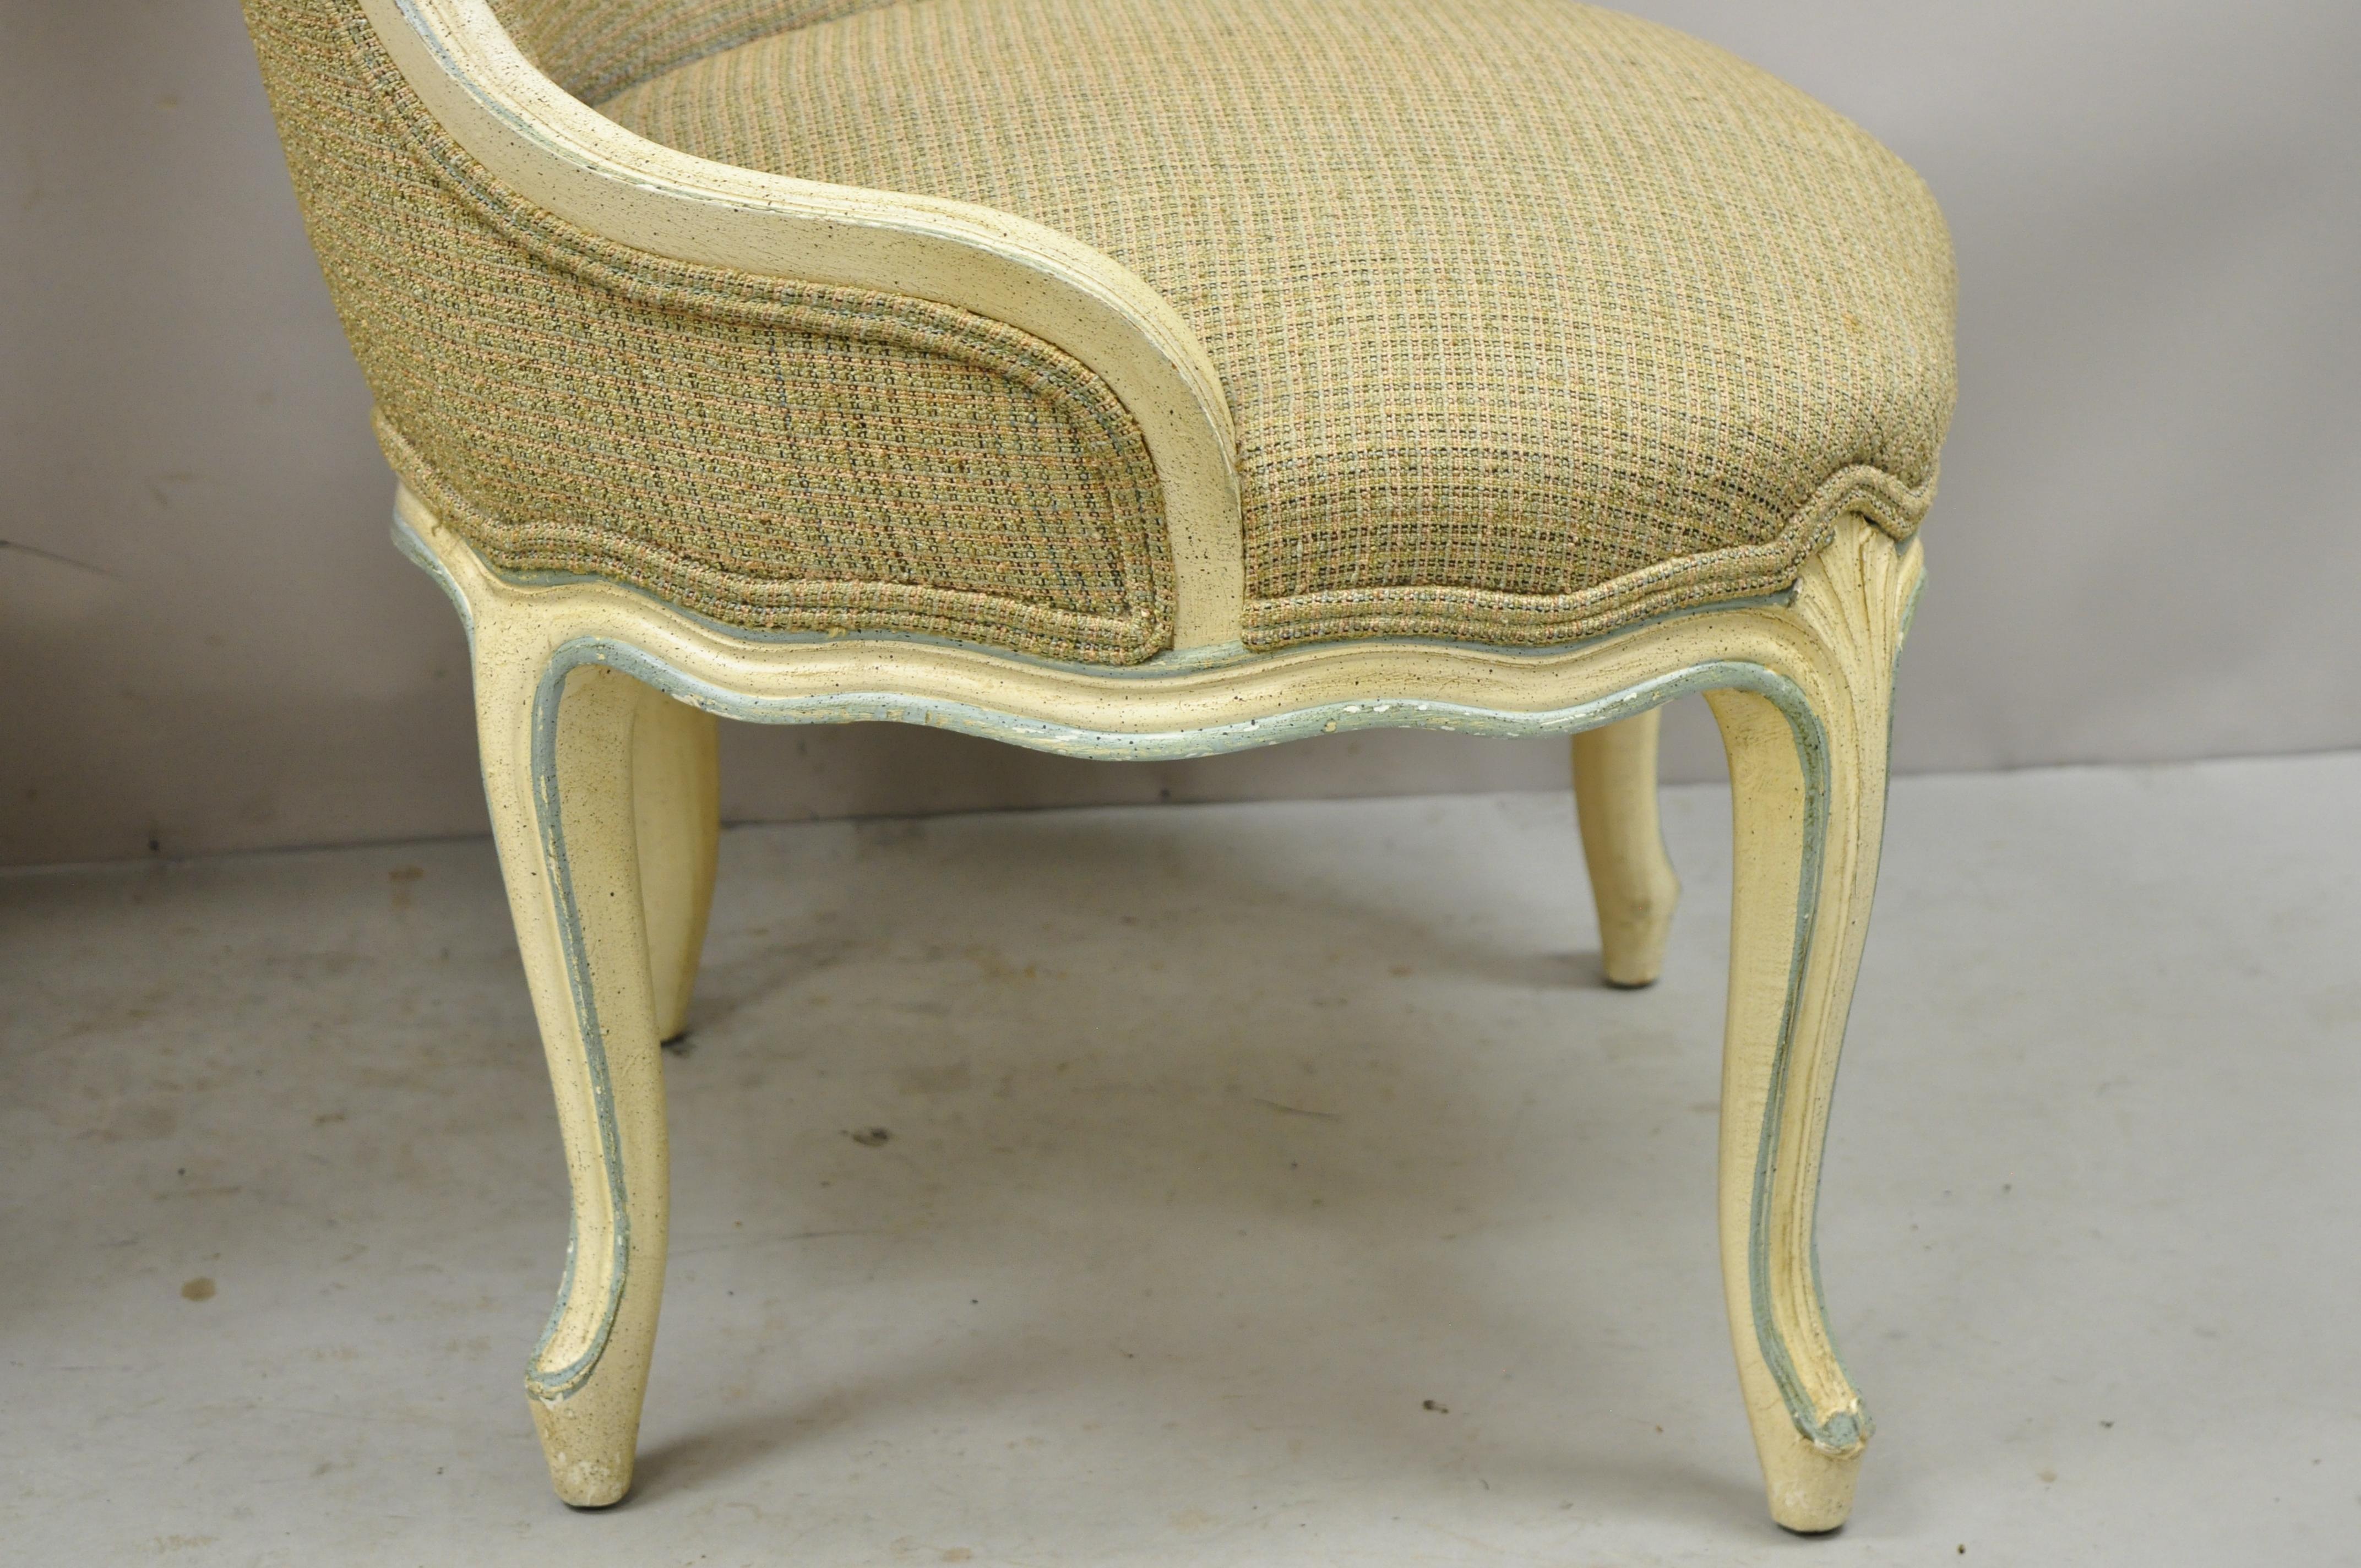 French Provincial Louis XV Cream Blue Hiprest Boudoir Slipper Chairs, a Pair In Good Condition For Sale In Philadelphia, PA